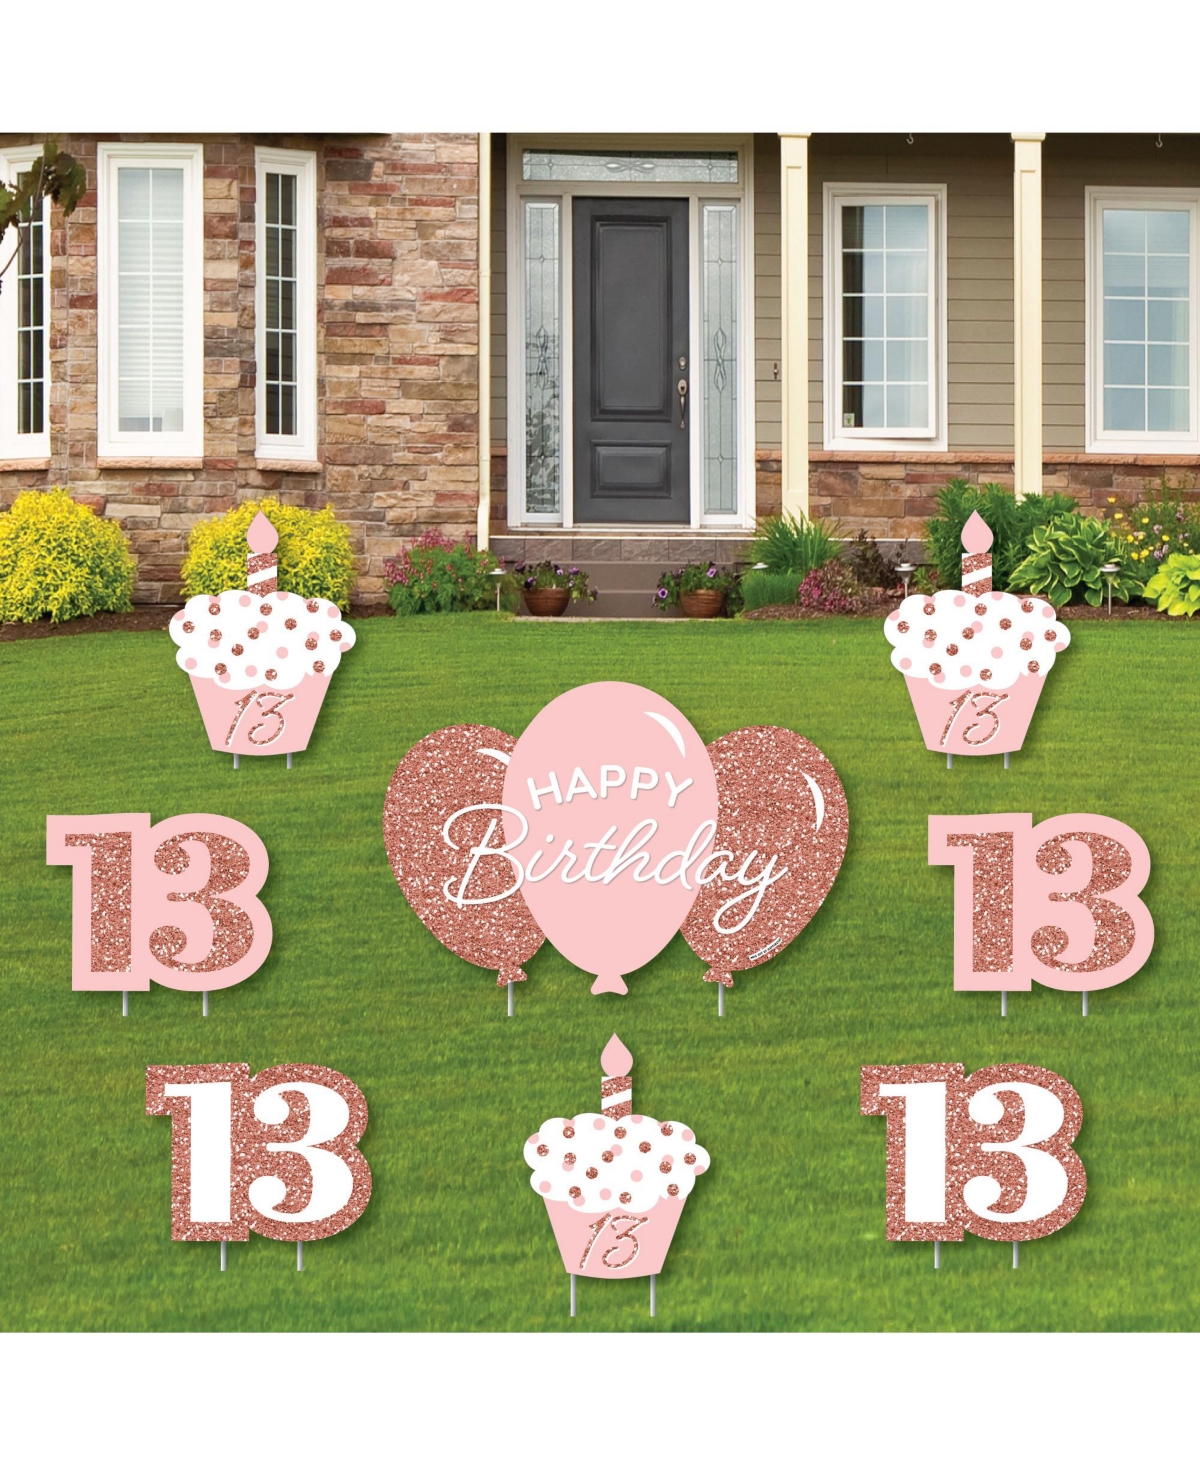 13th Pink Rose Gold Birthday Outdoor Lawn Decorations Party Yard Signs 8 Ct